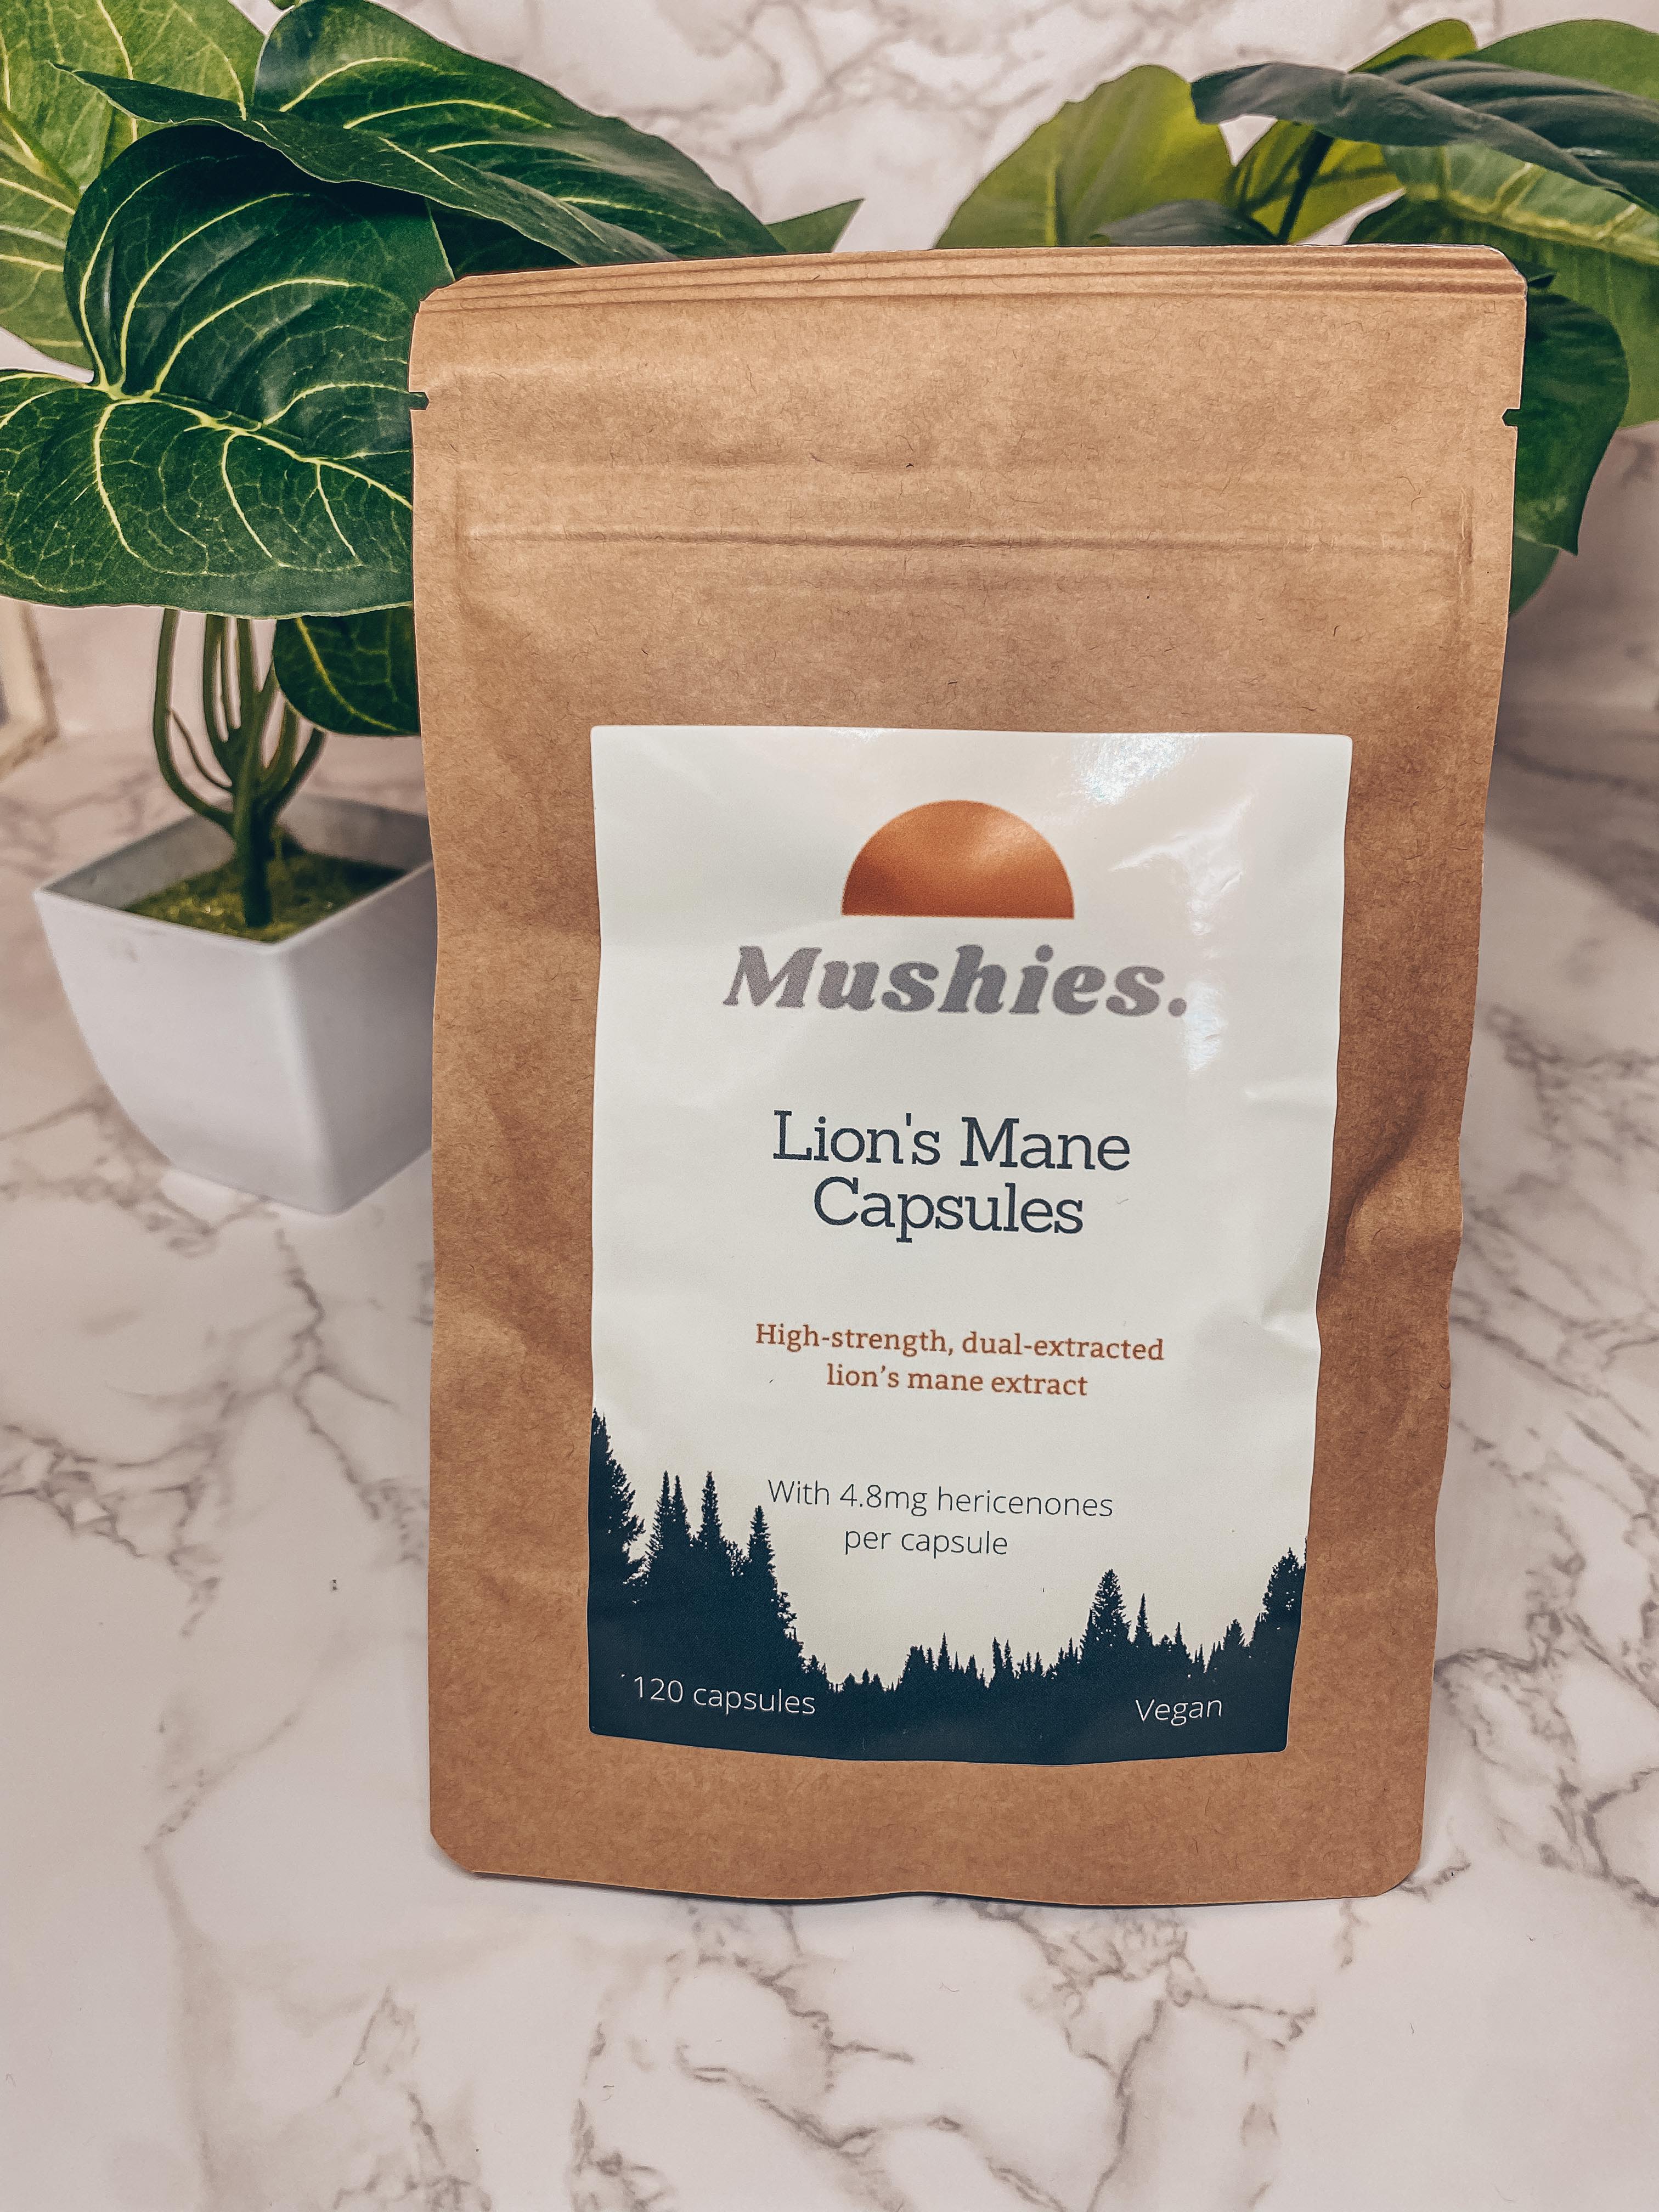 Are Lion’s Mane Supplements Effective For Cognitive Enhancement? Know Here!